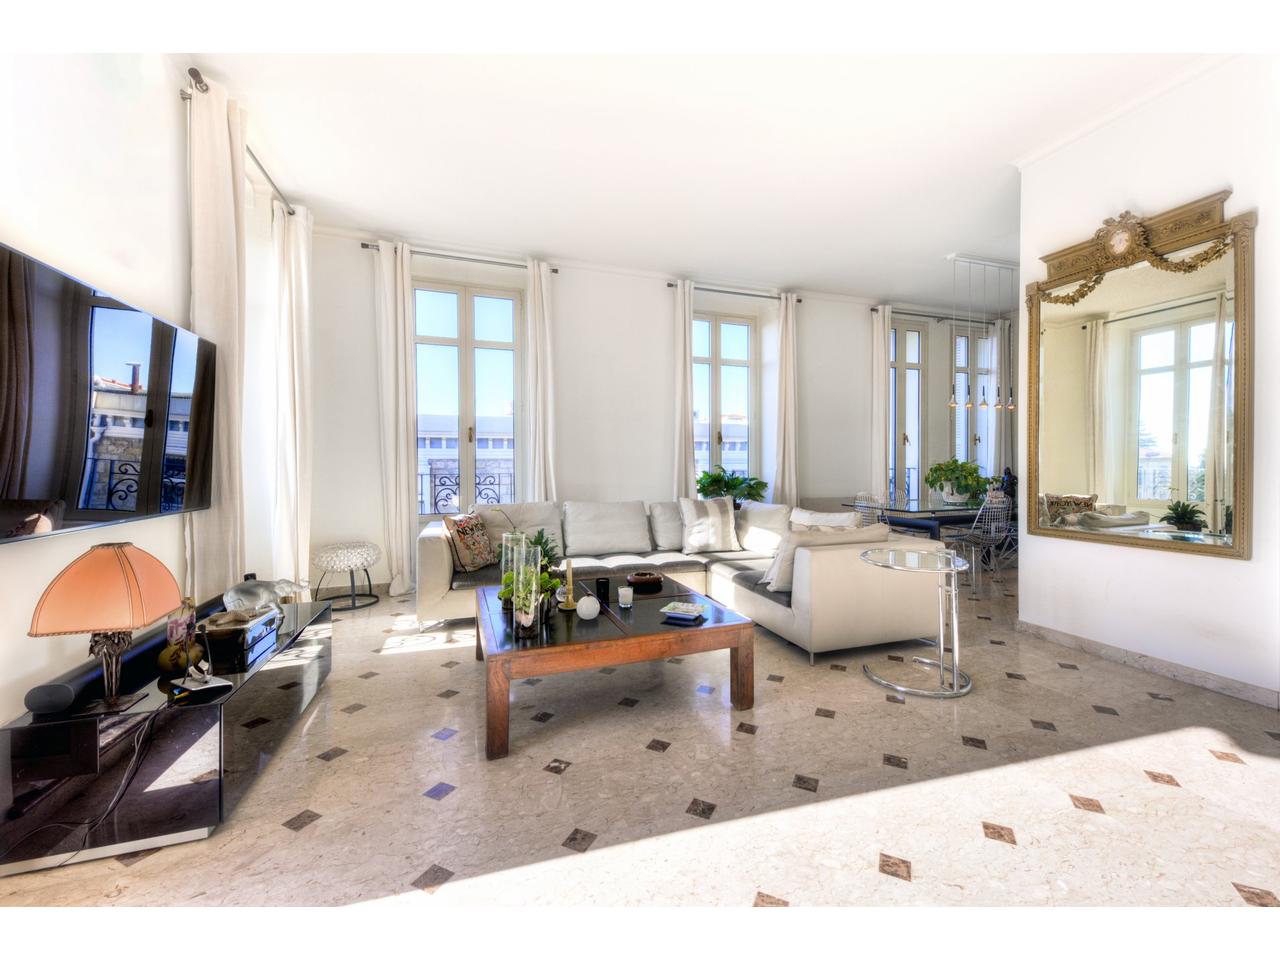 Nice Riviera - Agence Immobiliére Nice Côte d'Azur | Appartement  4 Rooms 121.77m2  for sale  1 495 000 €